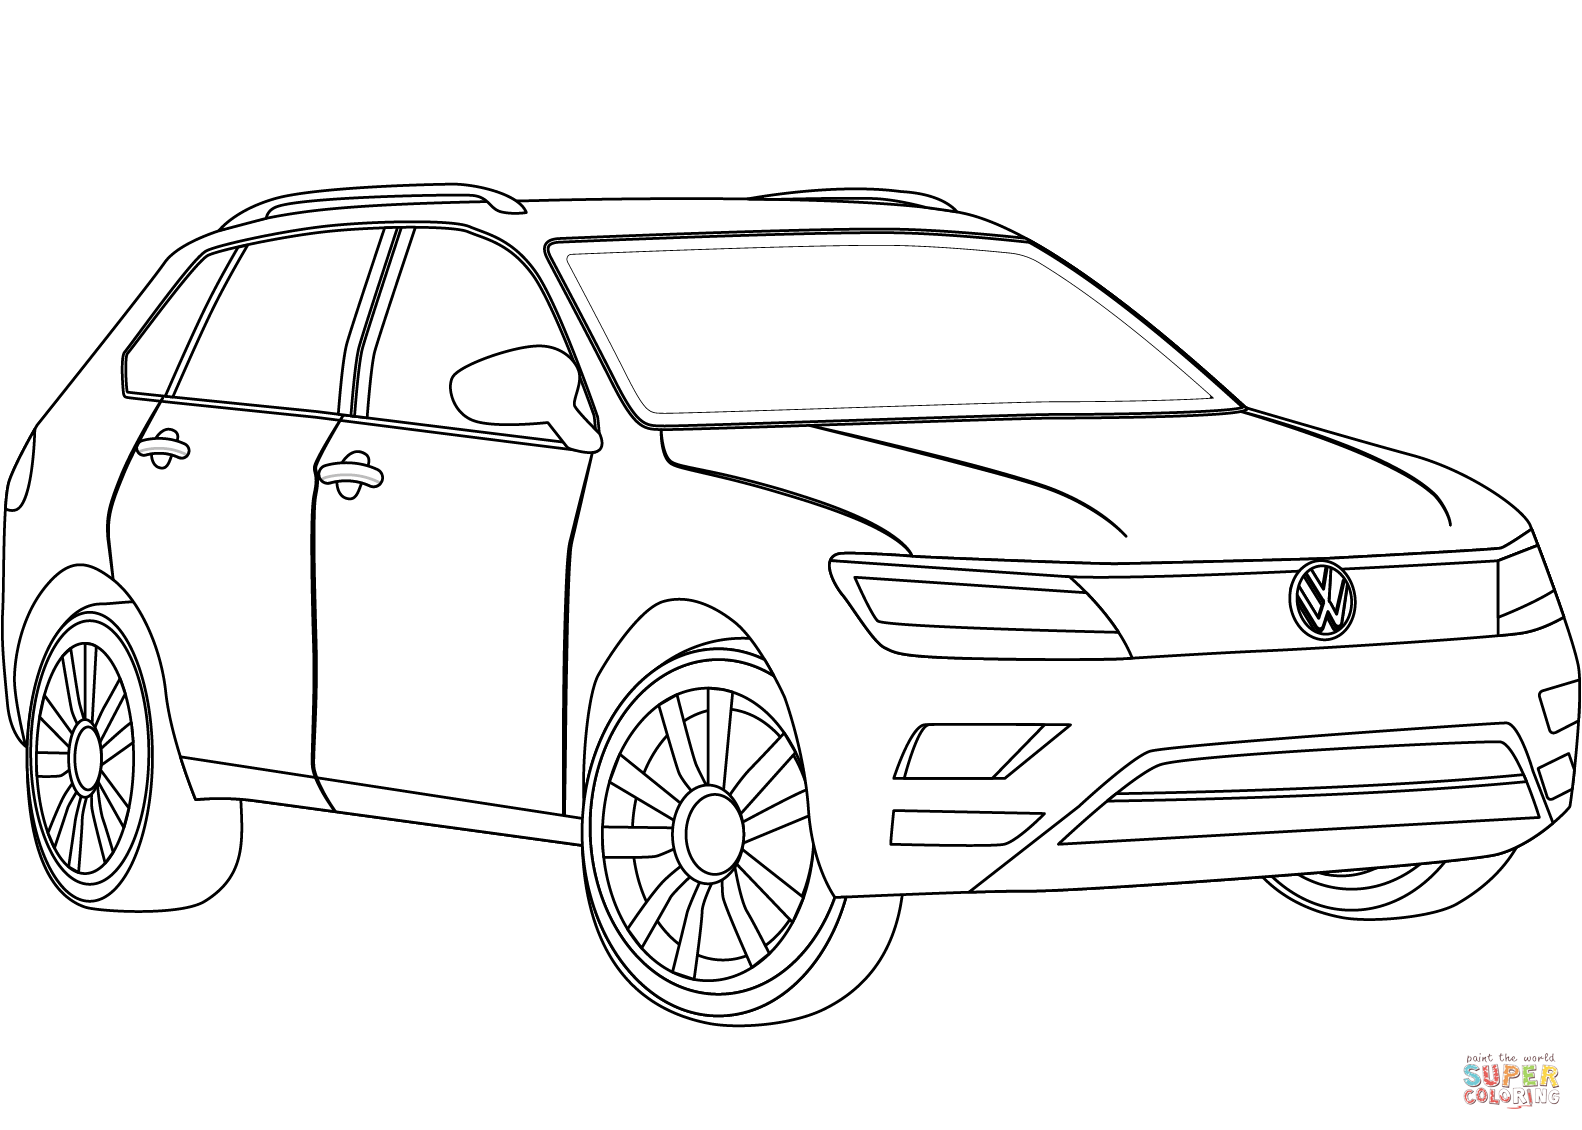 Vw tiguan coloring page free printable coloring pages